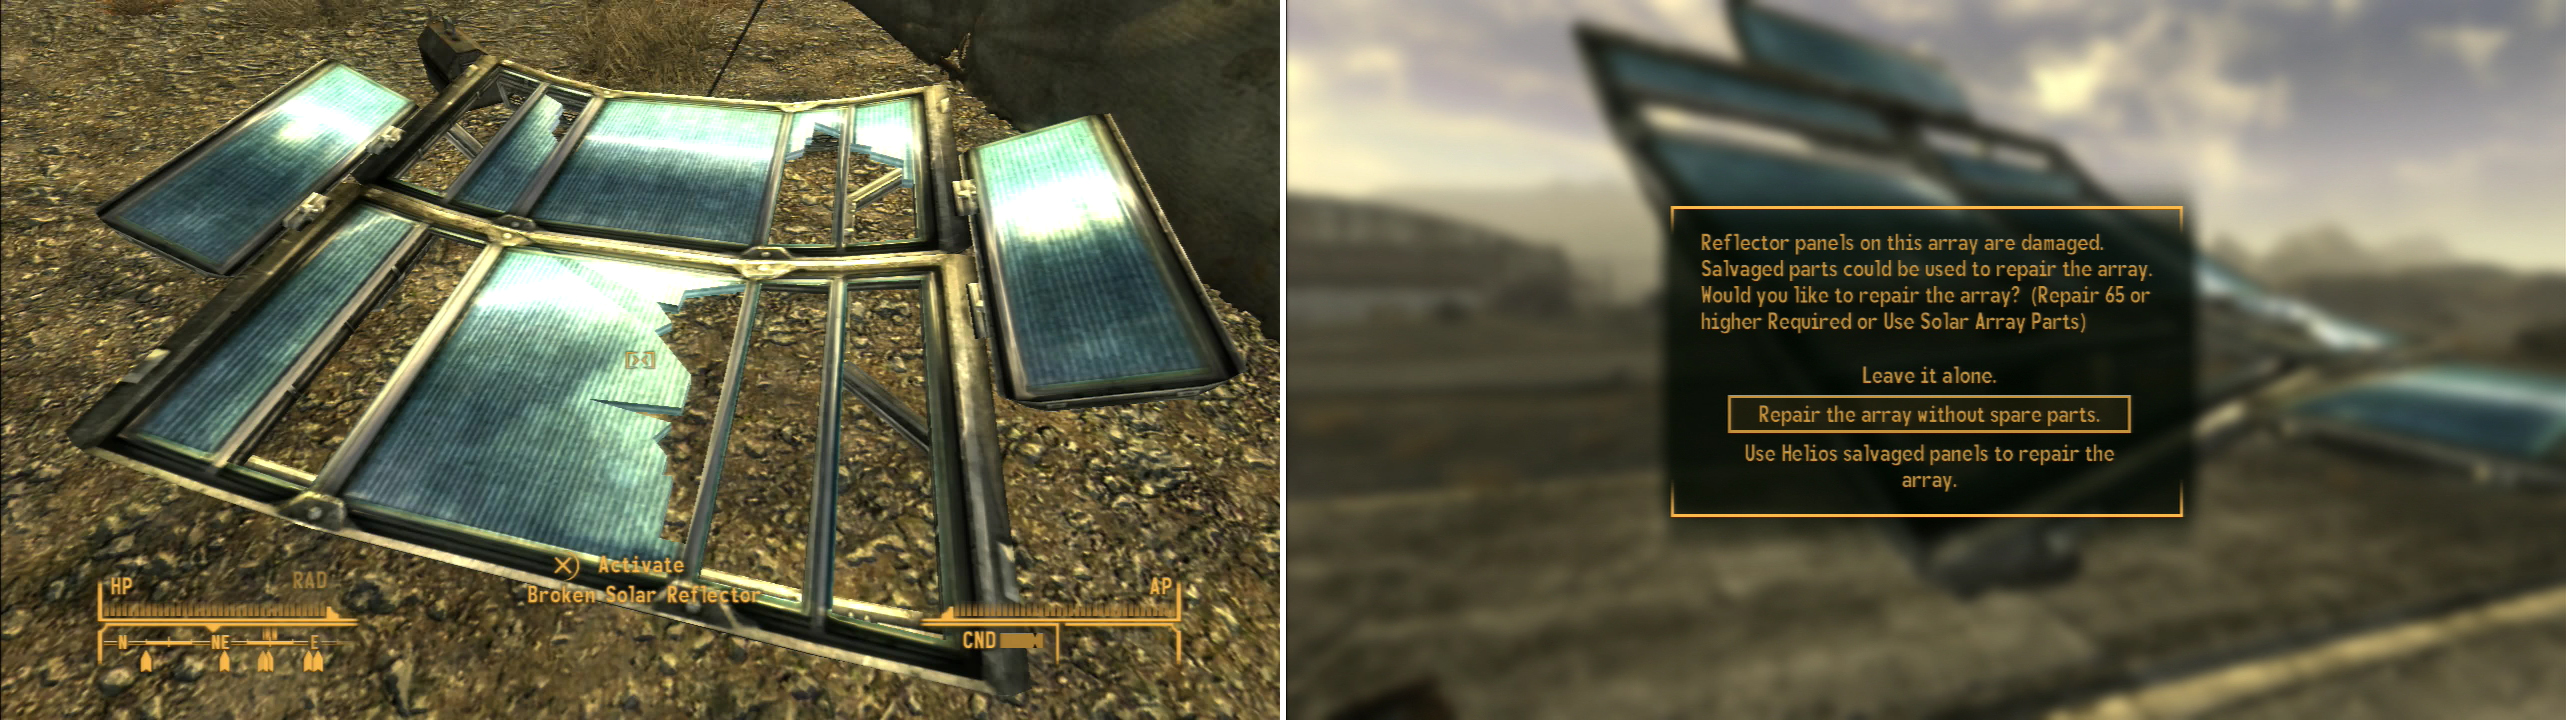 To repair the broken solar arrays in Nellis AFB, either salvage some parts from HELIOS One (left) or just put your Repair skill score to good use and go without parts (right).